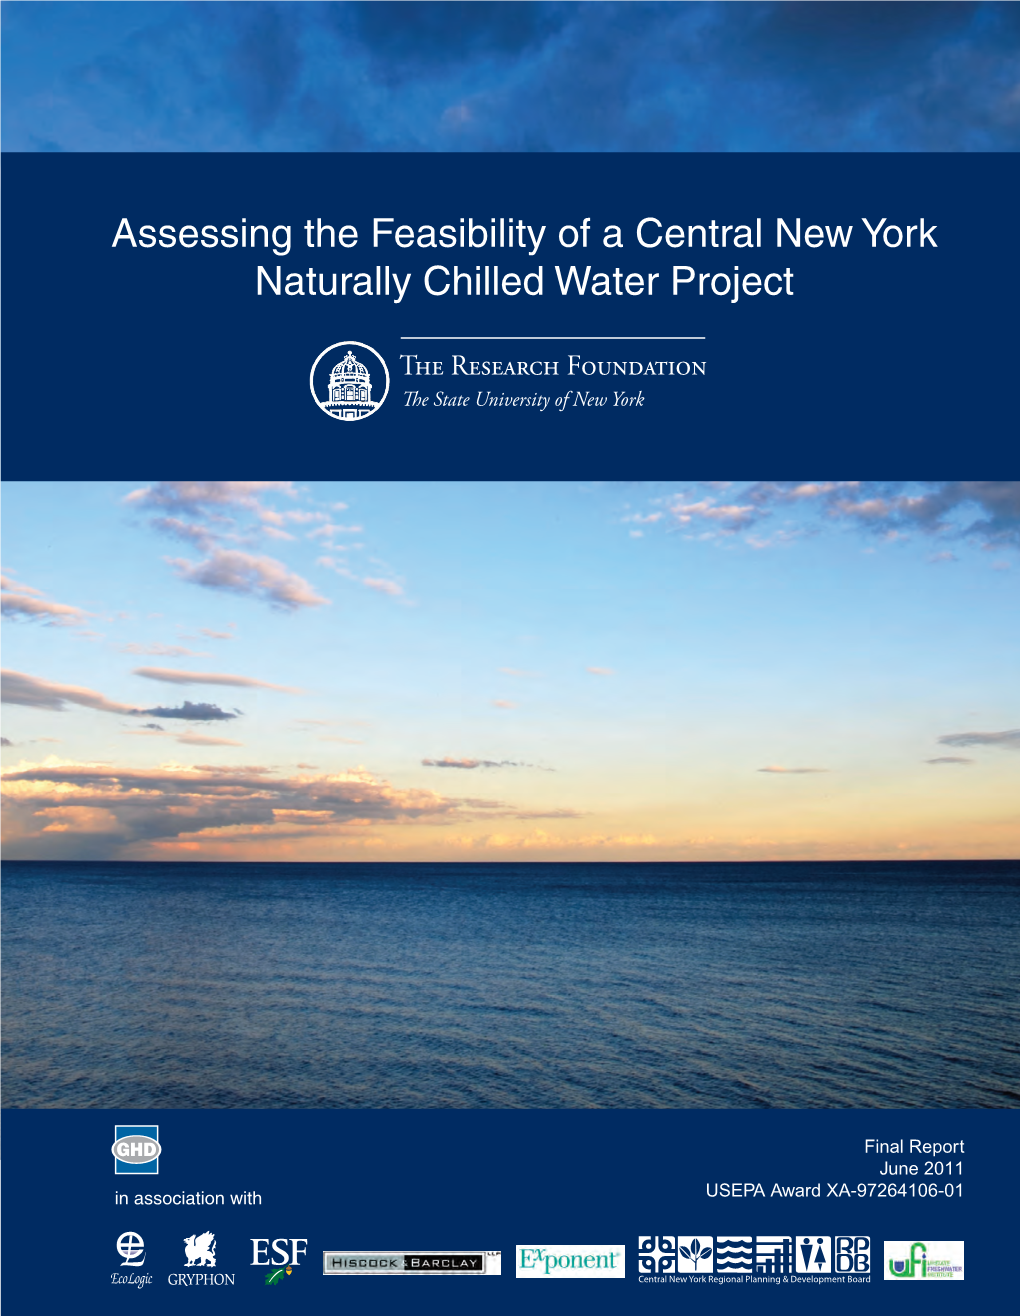 Central New York Naturally Chilled Water—Final Report, June 2011